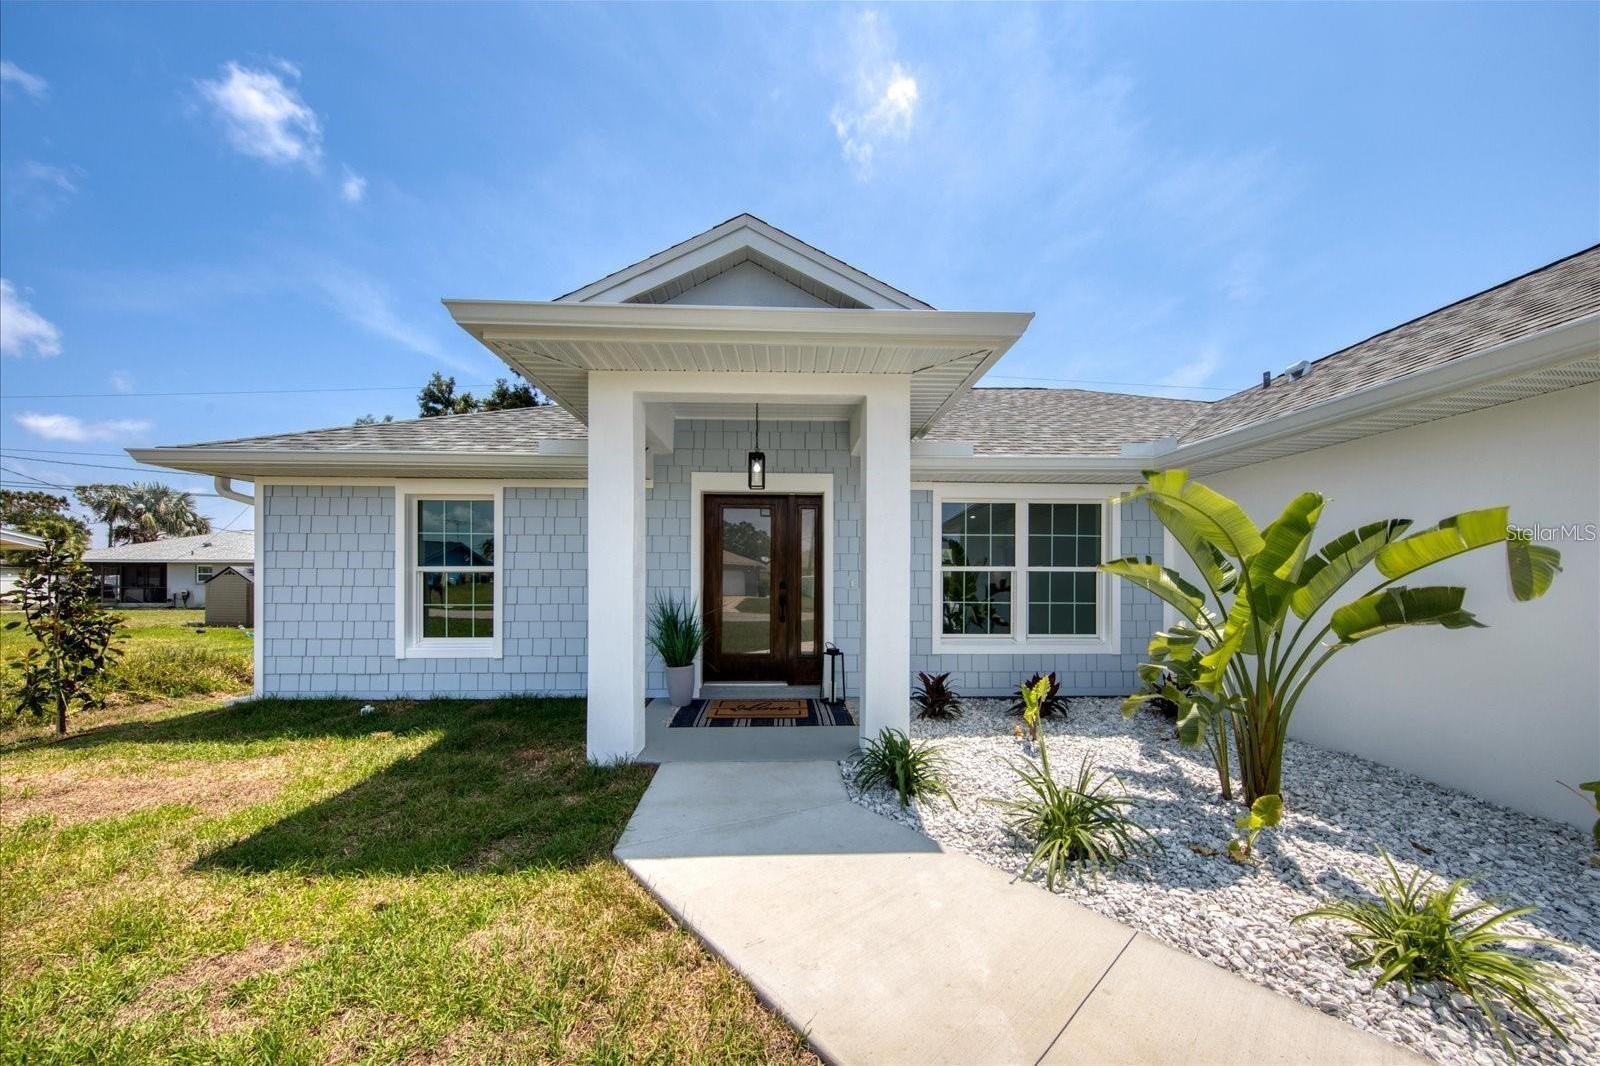 Photo one of 323 Shell Rd Venice FL 34293 | MLS A4601628